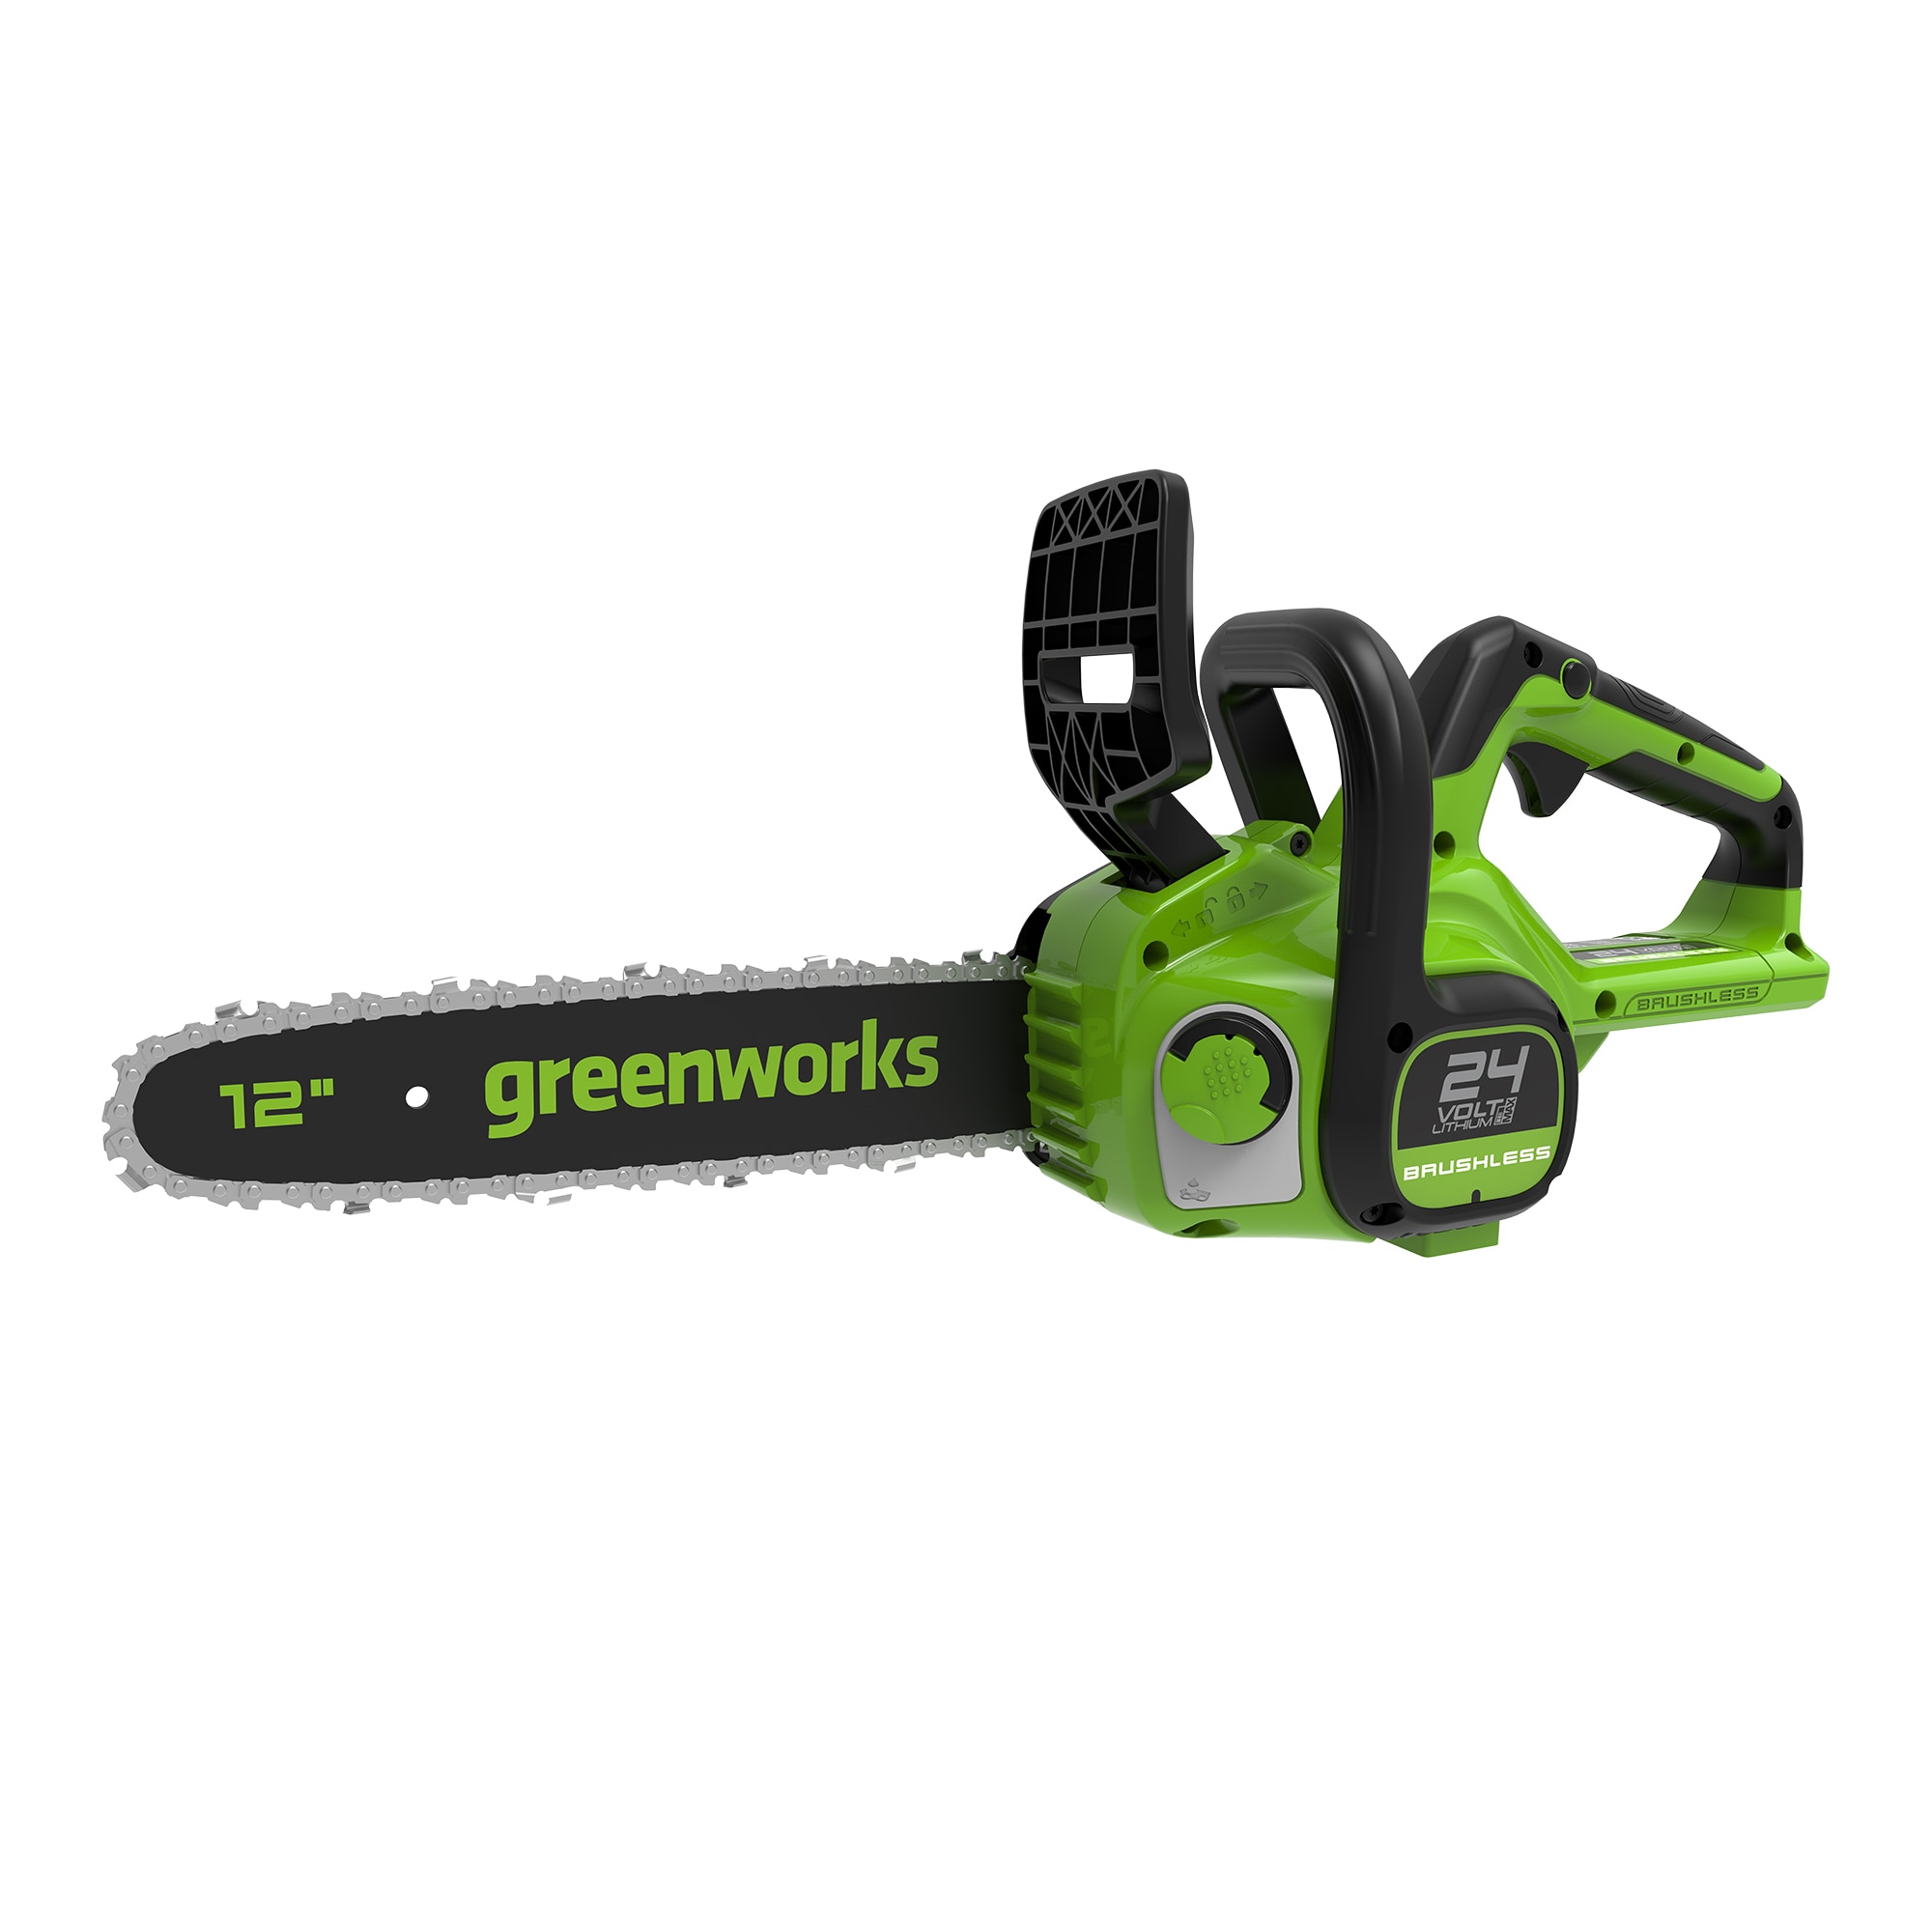 Greenworks 24V 12-Inch Brushless Chainsaw, Tool Only